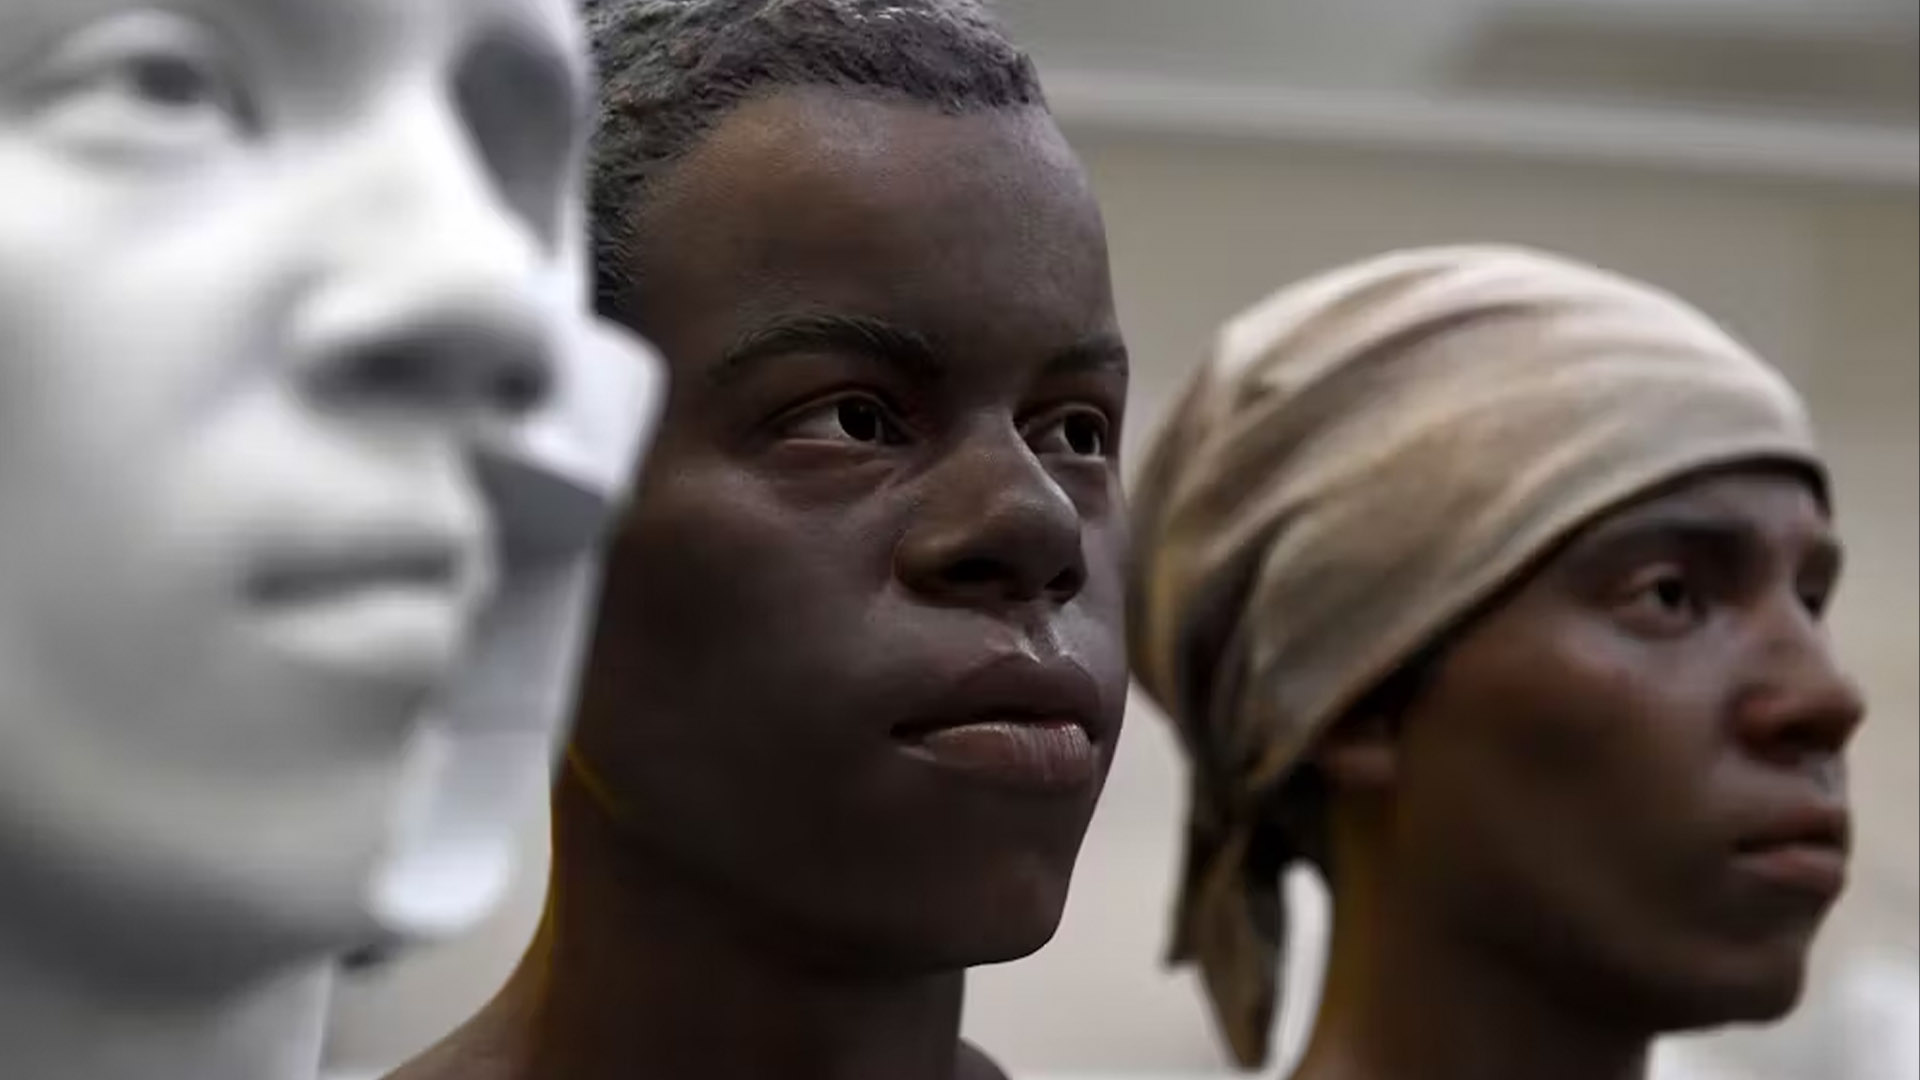 Facial reconstructions based on skeletal remains of enslaved African Americans who worked at Catoctin Furnace in Maryland, where scientists have also sequenced ancient DNA.